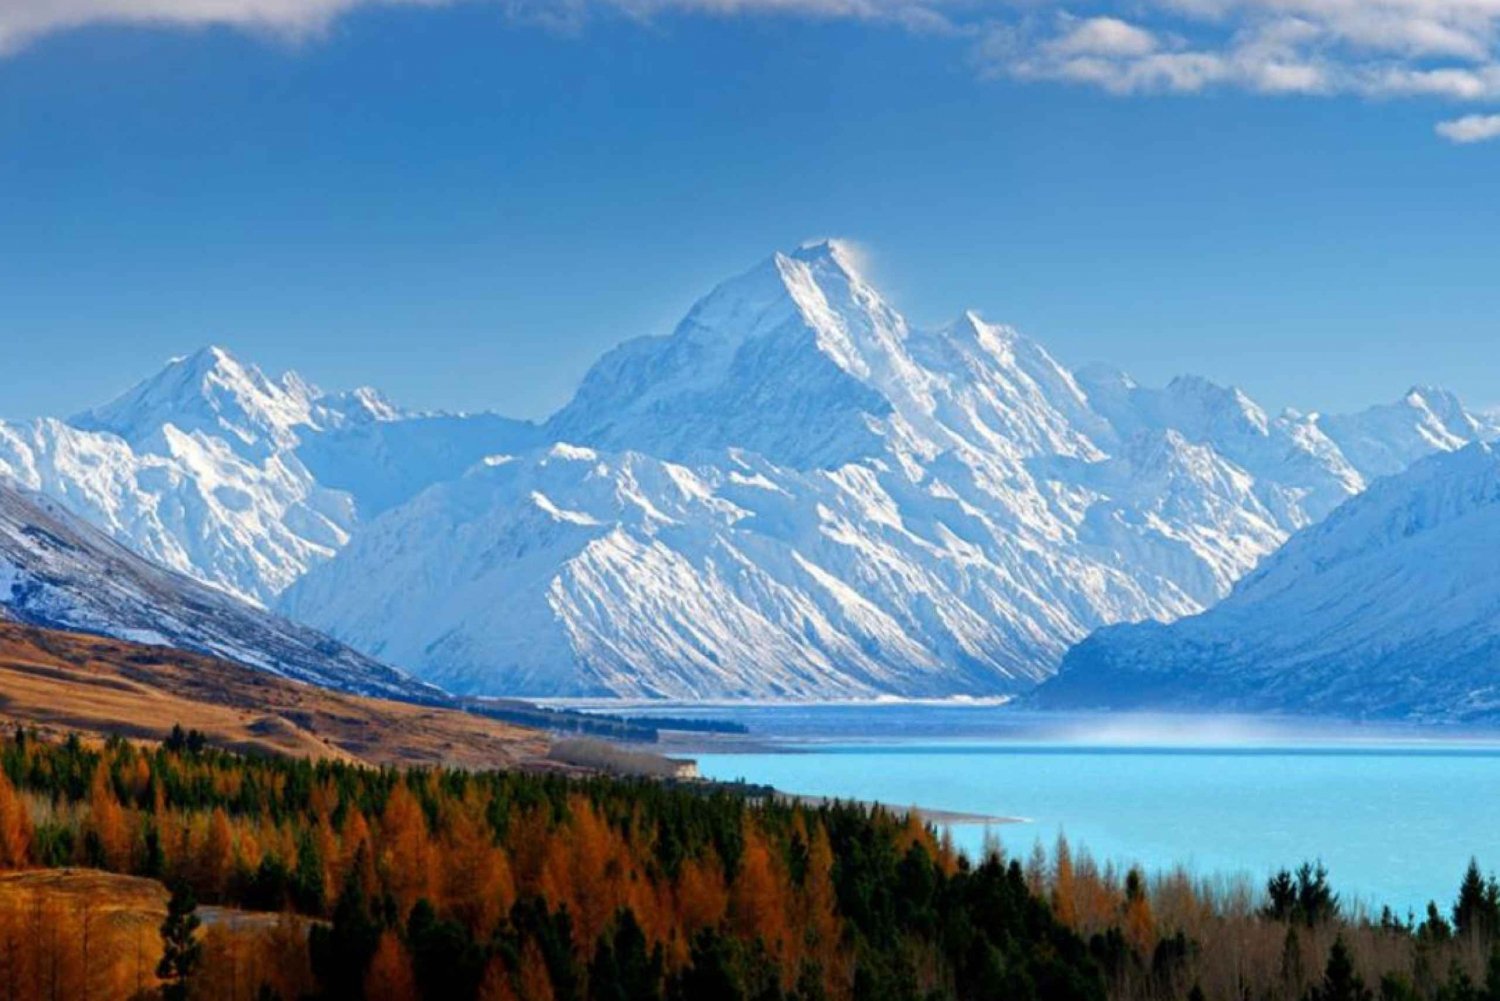 From Christchurch: Mount Cook Transfer with Lake Tekapo Tour